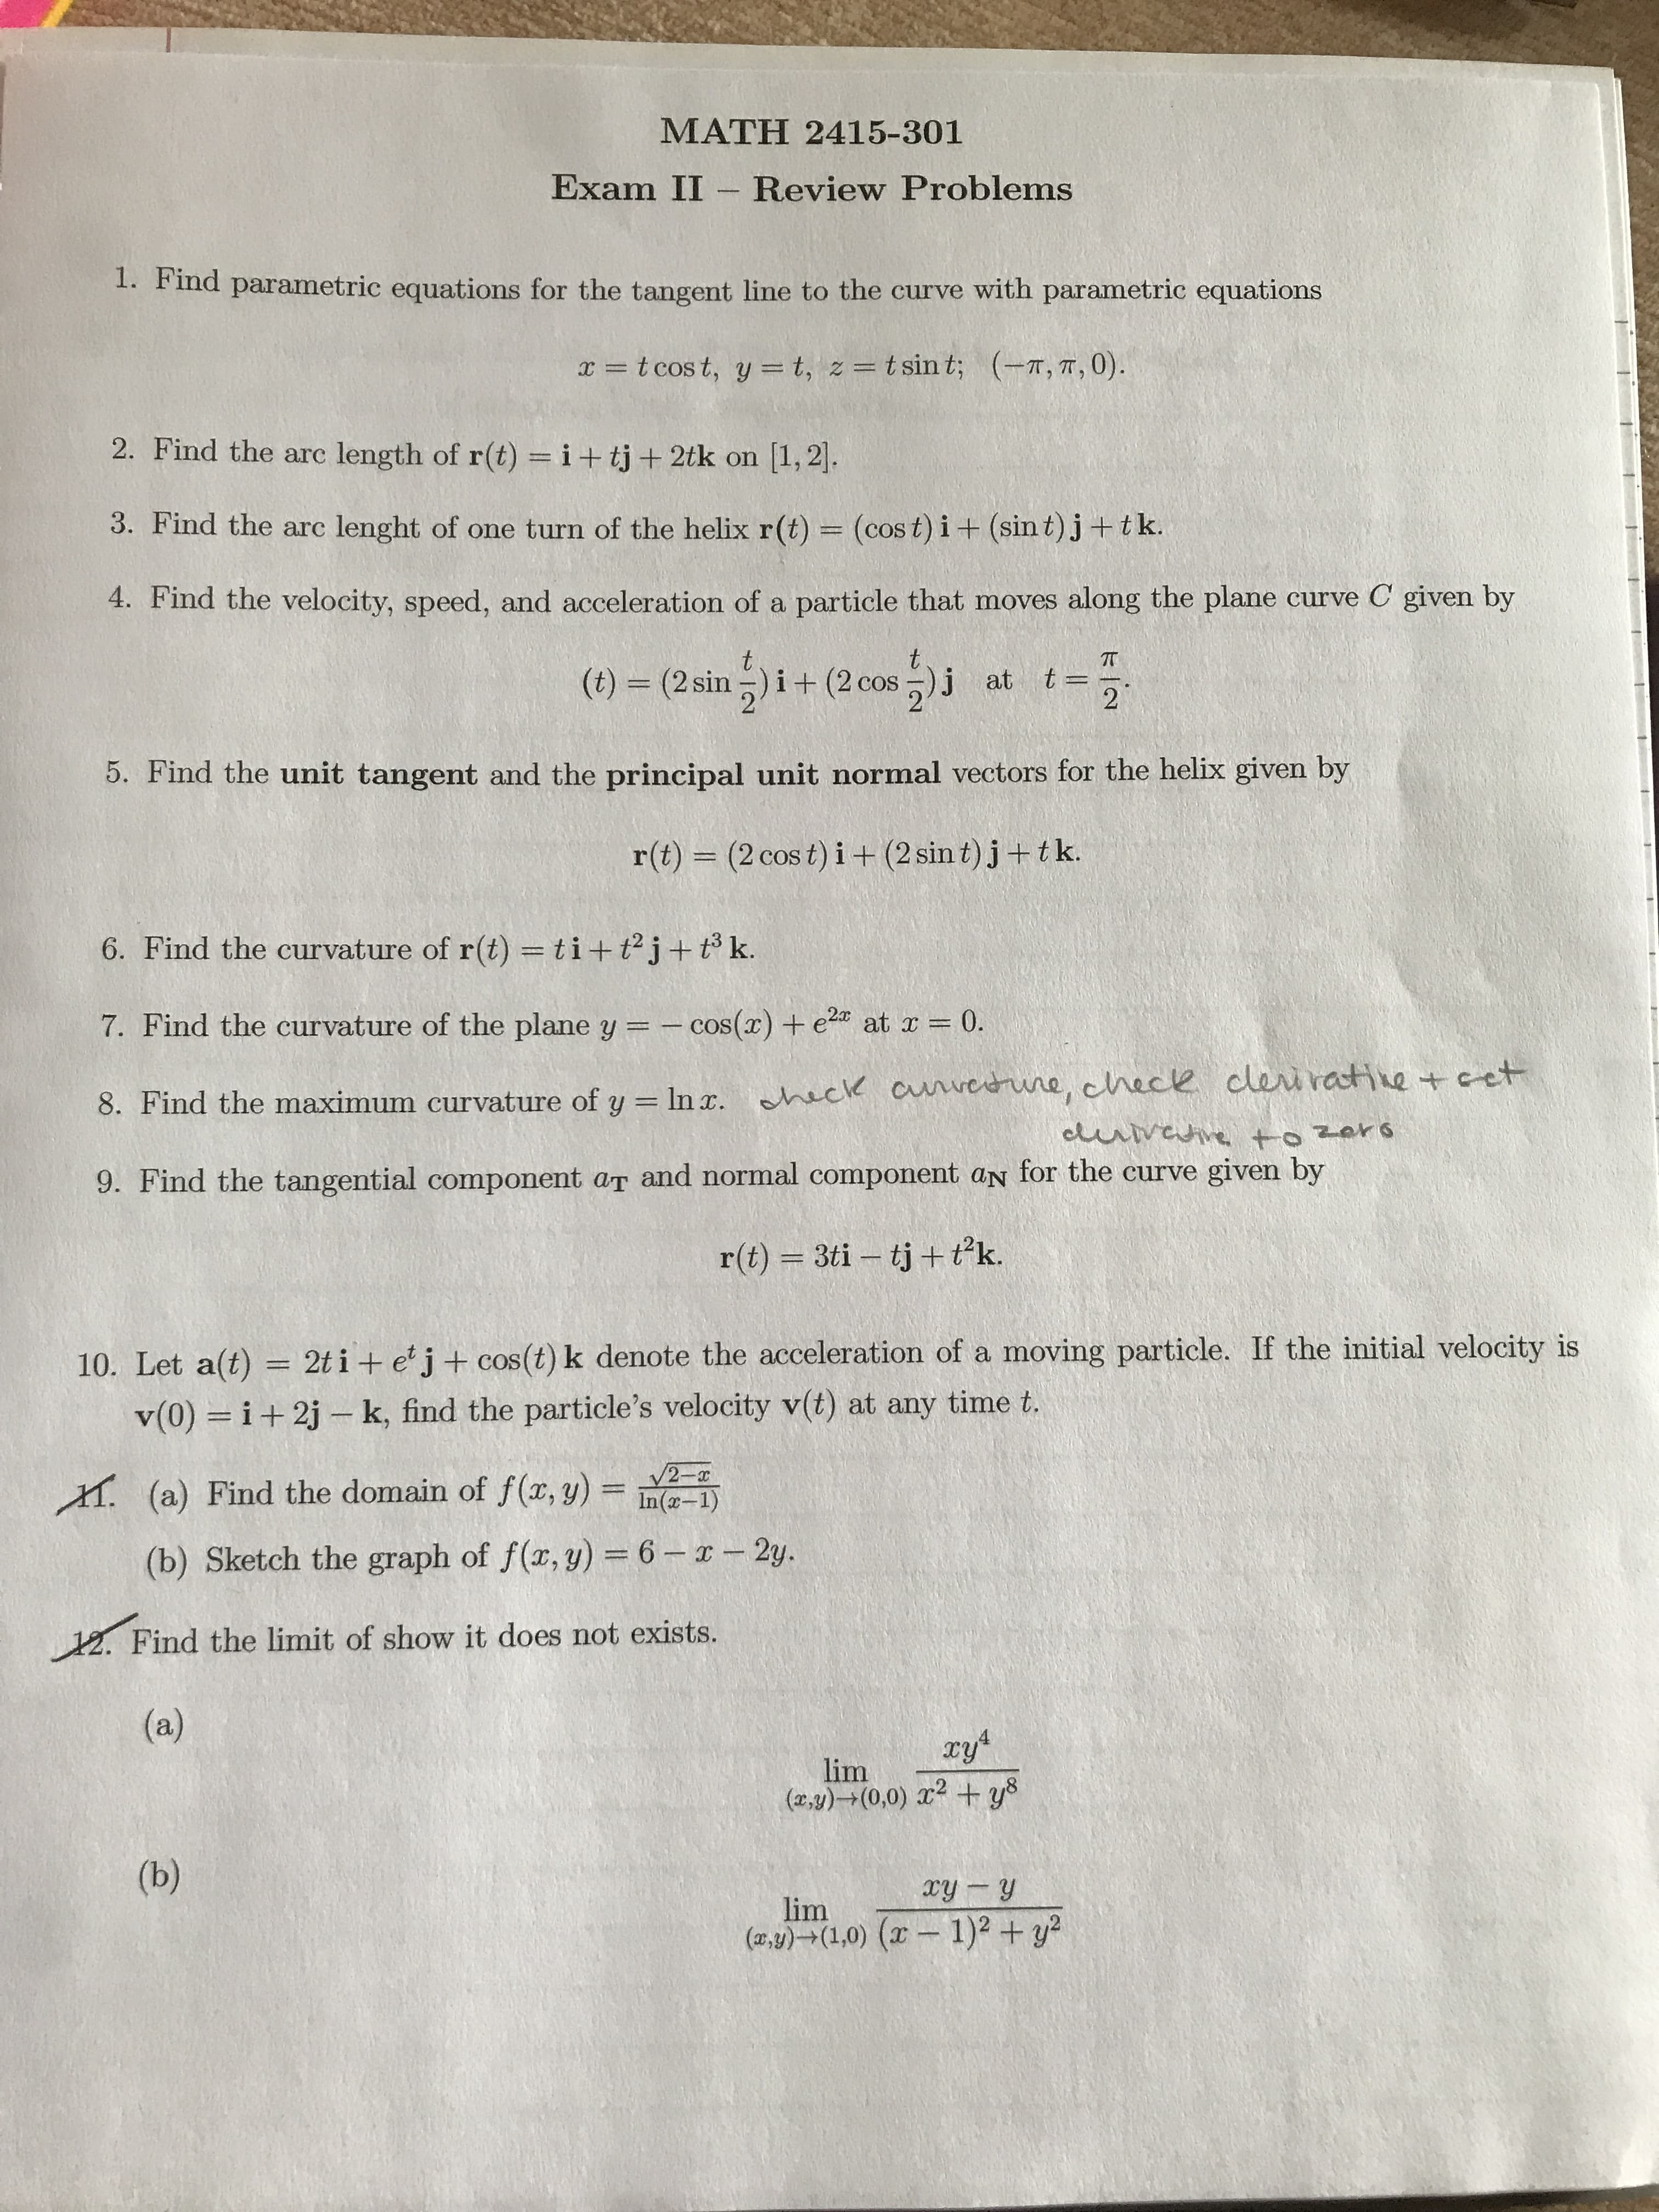 MATH 2415-301
Exam II Review Problems
1. Find parametric equations for the tangent line to the curve with parametric equations
t cost, y t, z = t sin t; (-T, T, 0).
2. Find the arc length of r(t) = i+ tj+ 2tk on
[1,2
3. Find the arc
lenght of one turn of the helix r(t) = (cos t) i + (sin t)j+t k.
4. Find the velocity, speed, and acceleration of a particle that moves along the plane curve C given by
t
t
TT
at t=
2
(t) (2 sin)i+ (2 cos )j
5. Find the unit tangent and the principal unit normal vectors for the helix given by
(2 cos t) i + (2 sin t)j+tk.
r(t)
6. Find the curvature of r(t) = ti+ tj+ tk.
7. Find the curvature of the plane y = -cos(r)+ e
at r = 0.
of y In . ack auveerwne, check cleiratie cet
8. Find the maximum curvature
euvevetozars
9. Find the tangential component aT and normal component aN for the curve given by
r(t) 3ti tj t?k.
10. Let a(t) = 2t i+ e j+cos(t) k denote the acceleration of a moving particle. If the initial velocity is
i+2j k, find the particle's velocity v(t) at any time t.
v(0)
2-
In(x-1)
(a) Find the domain of f (x, y)
T
(b) Sketch the graph of f(x, y) = 6--2y.
12. Find the limit of show it does not exists.
(a)
4
lim
()+(0,0) 2 +y8
(b)
xy y
lim
(xy)(1,0) (
1)2 +y
